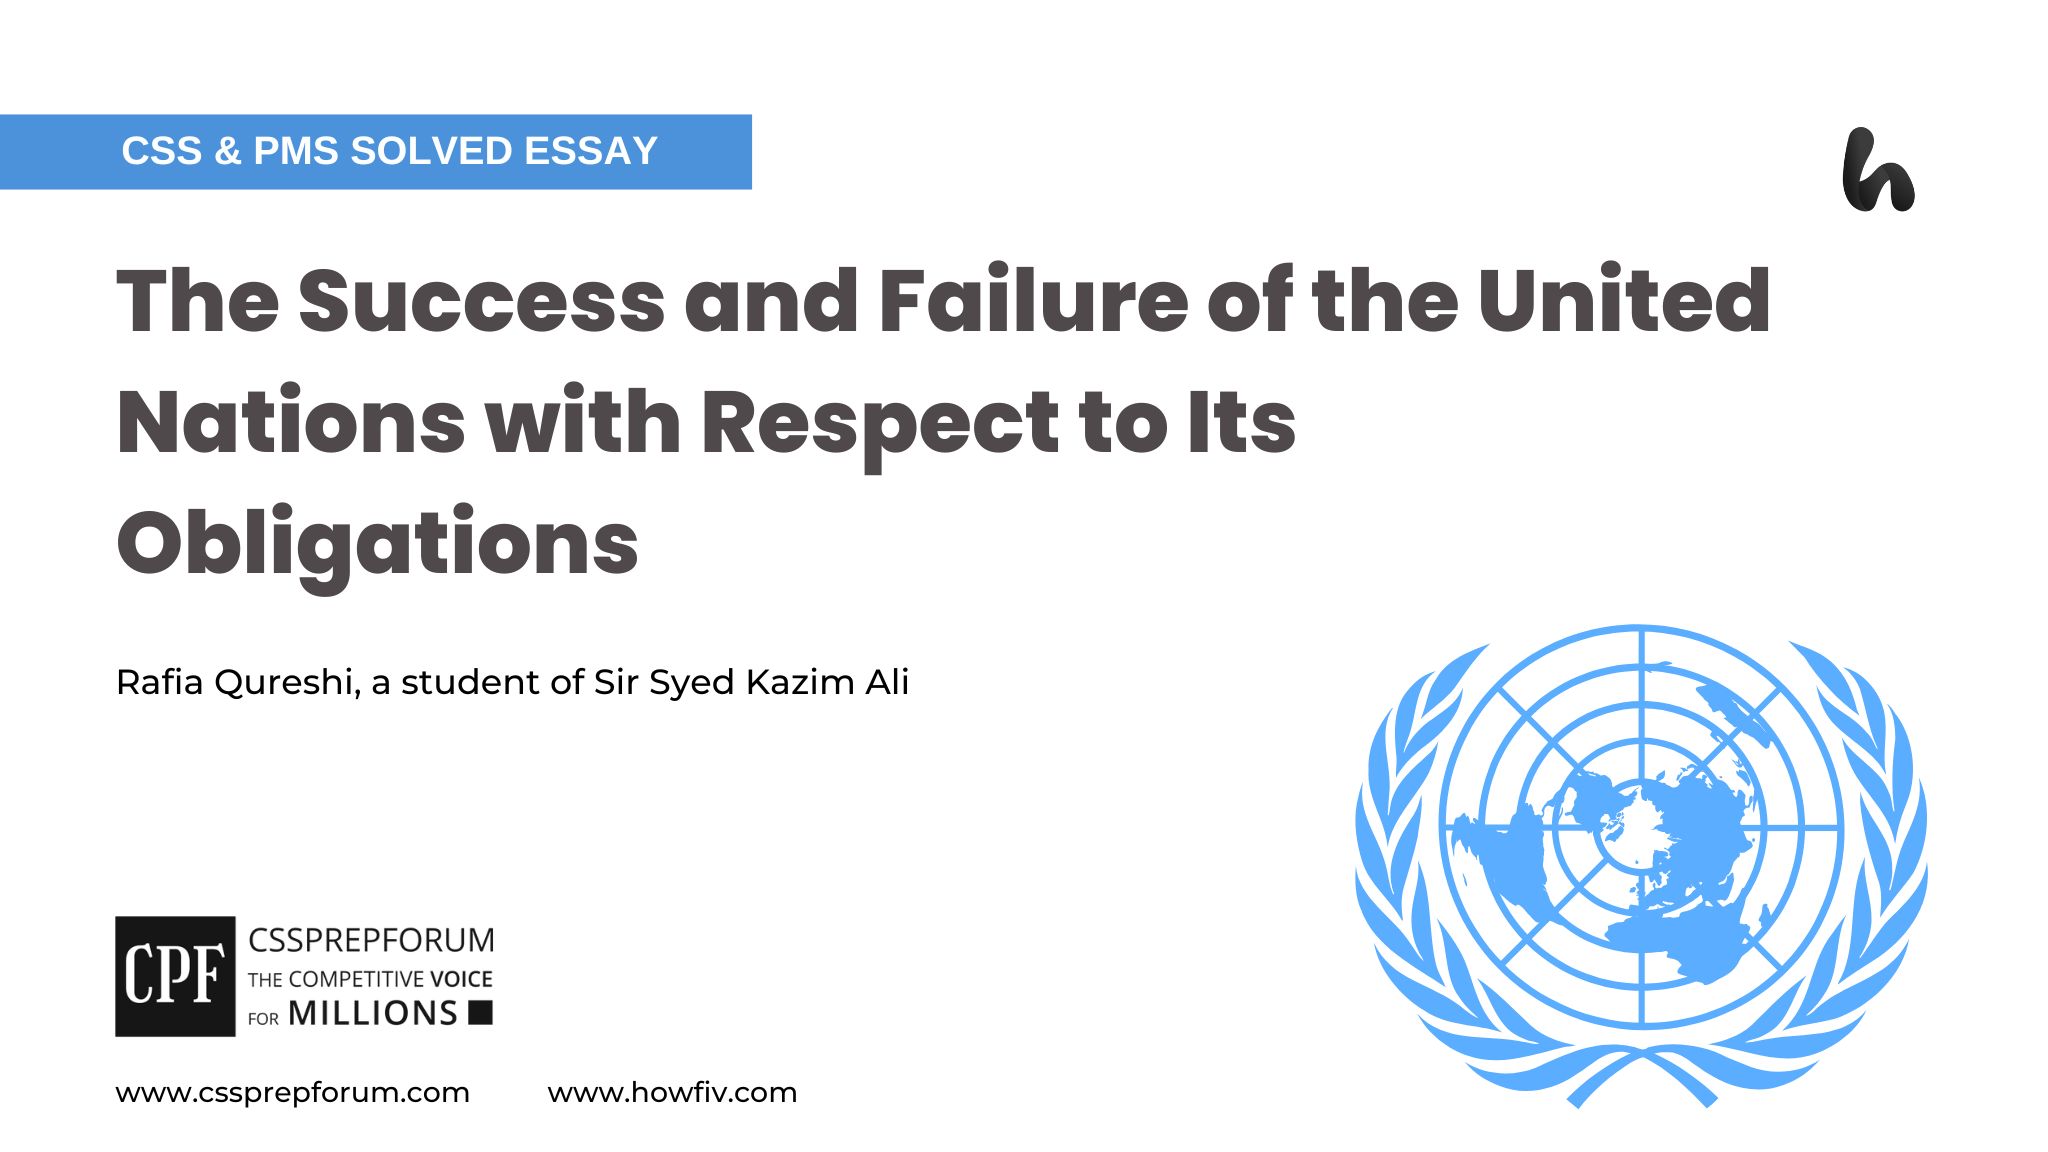 The United Nations’ Success and Failure by Rafia Qureshi